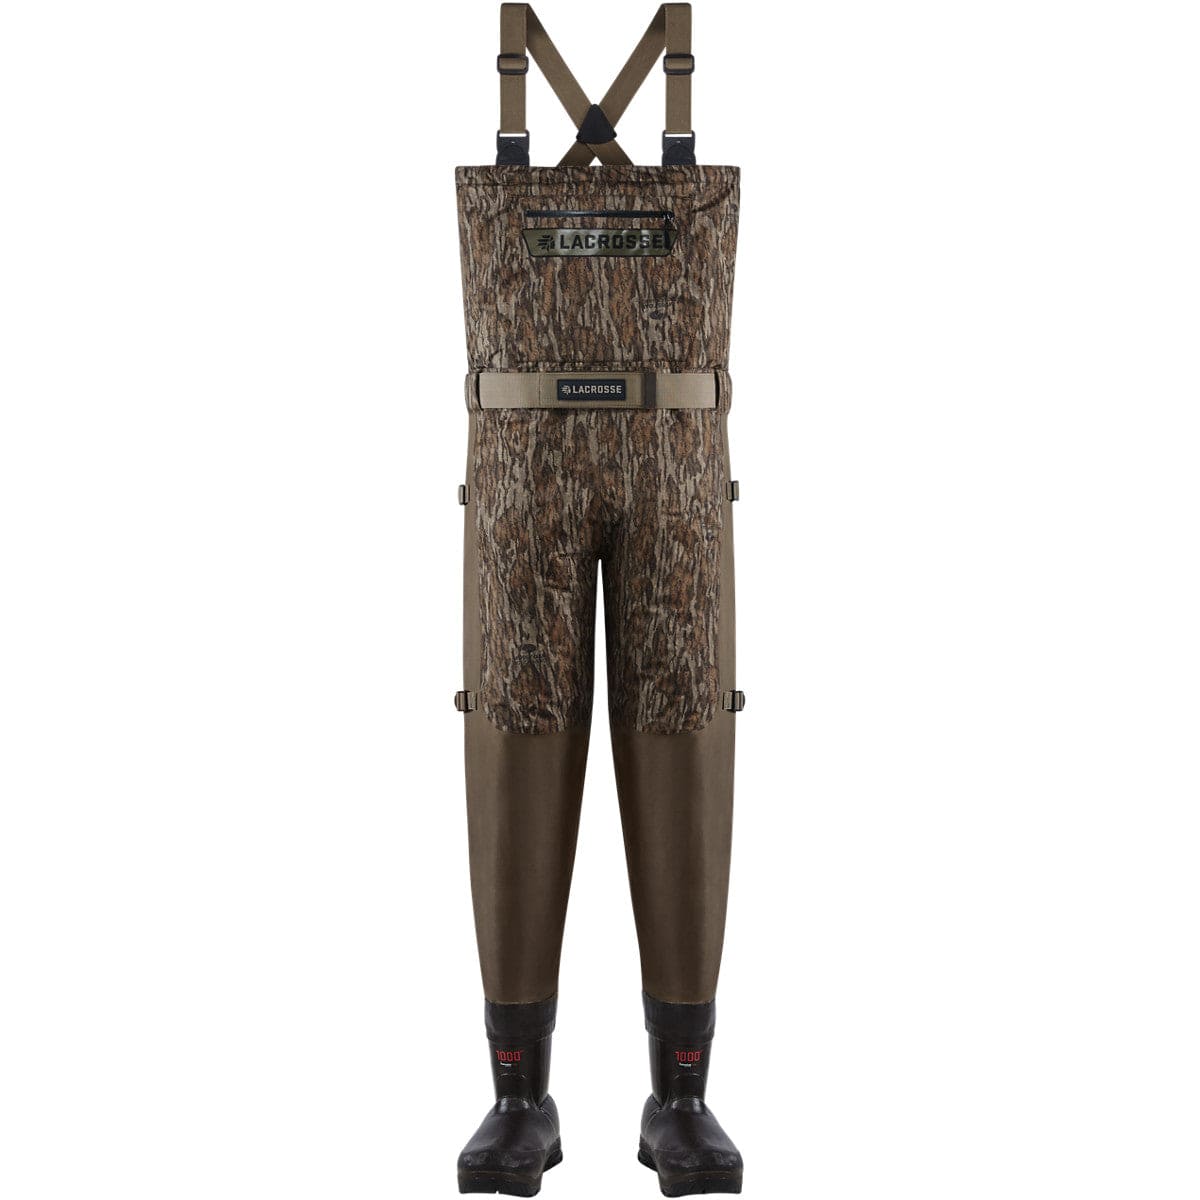 LaCrosse Insulated Alpha Swampfox Wader by Texas Fowlers